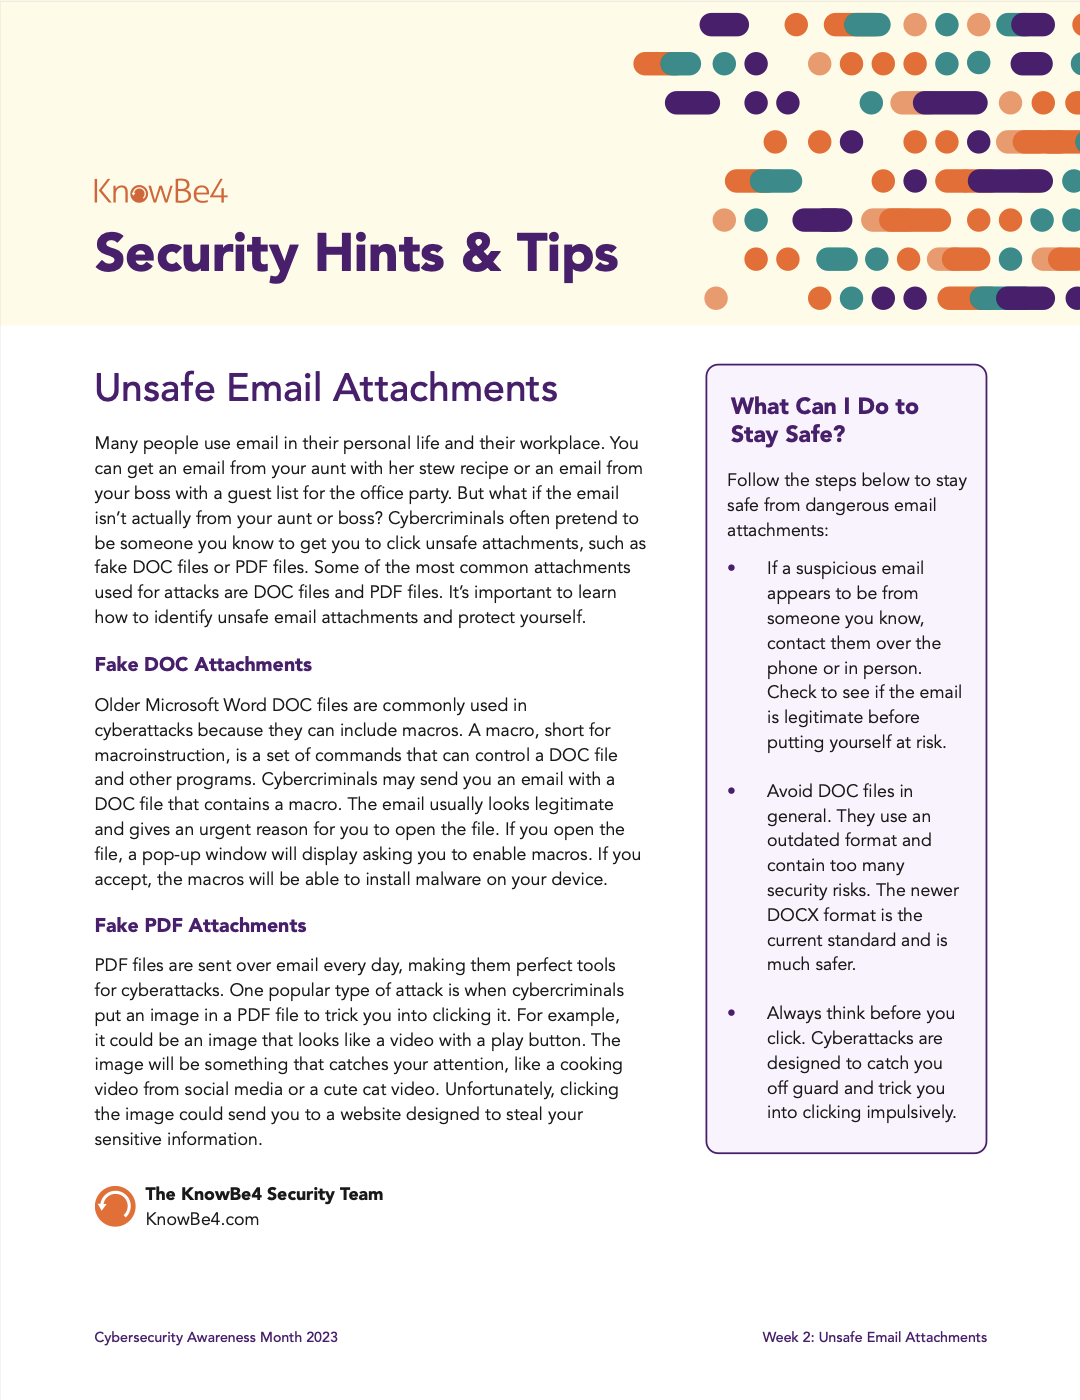 Unsafe Email Attachments